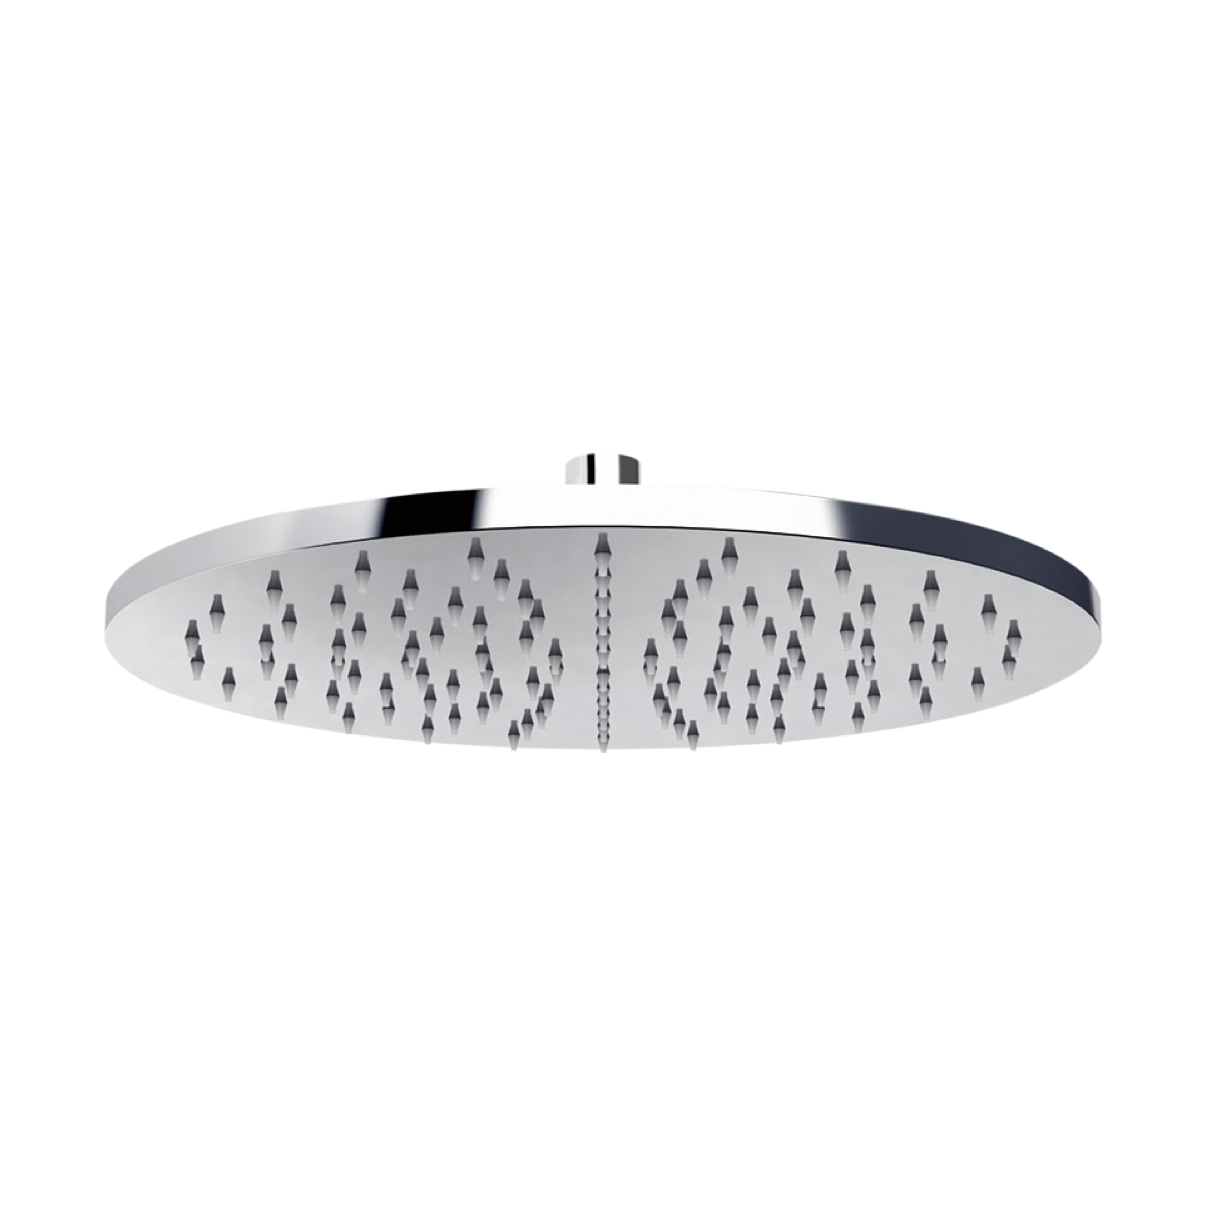 fittings-250mm-round-air-in-showerhead.png